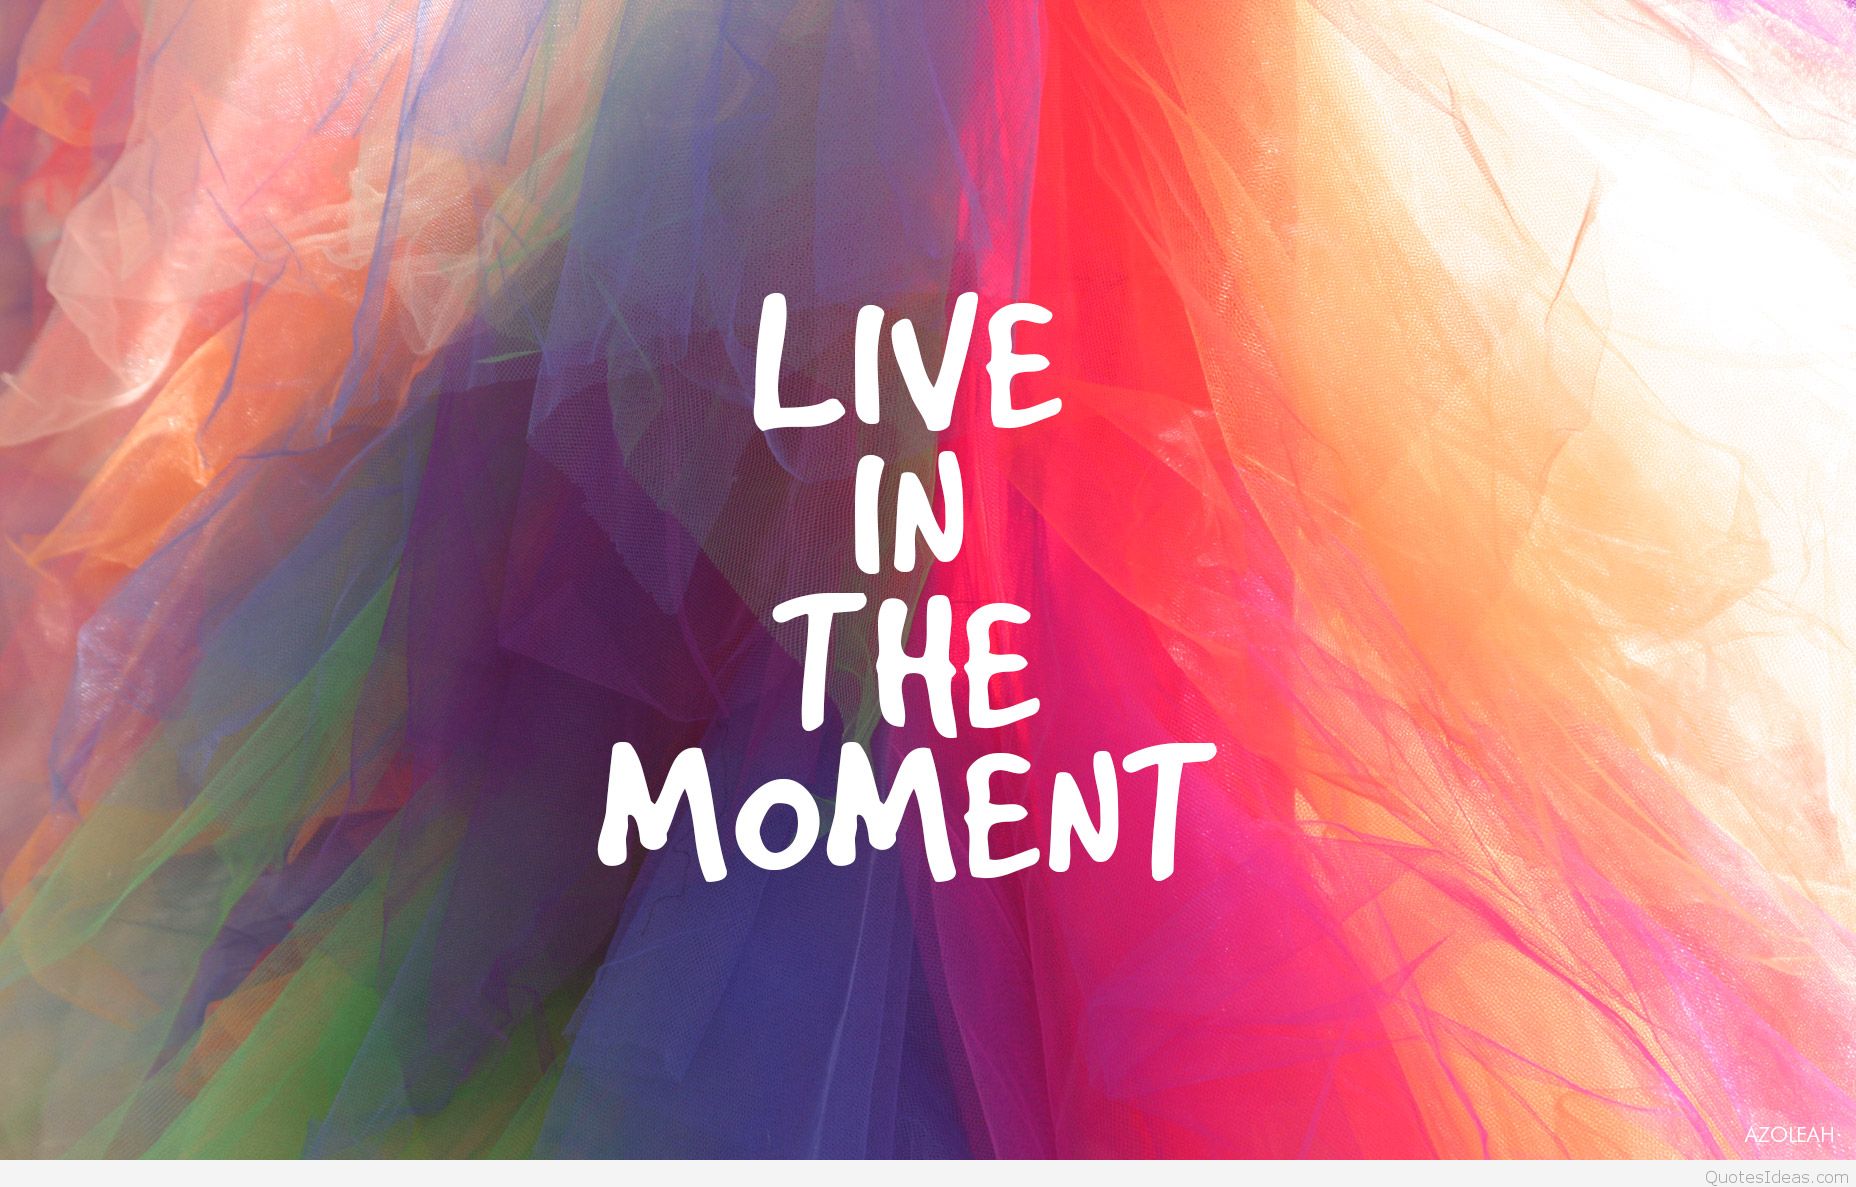 Moments my life. Красивое изображение moments. Life moments картинки. Live in the moment. Надпись Life in the moment.